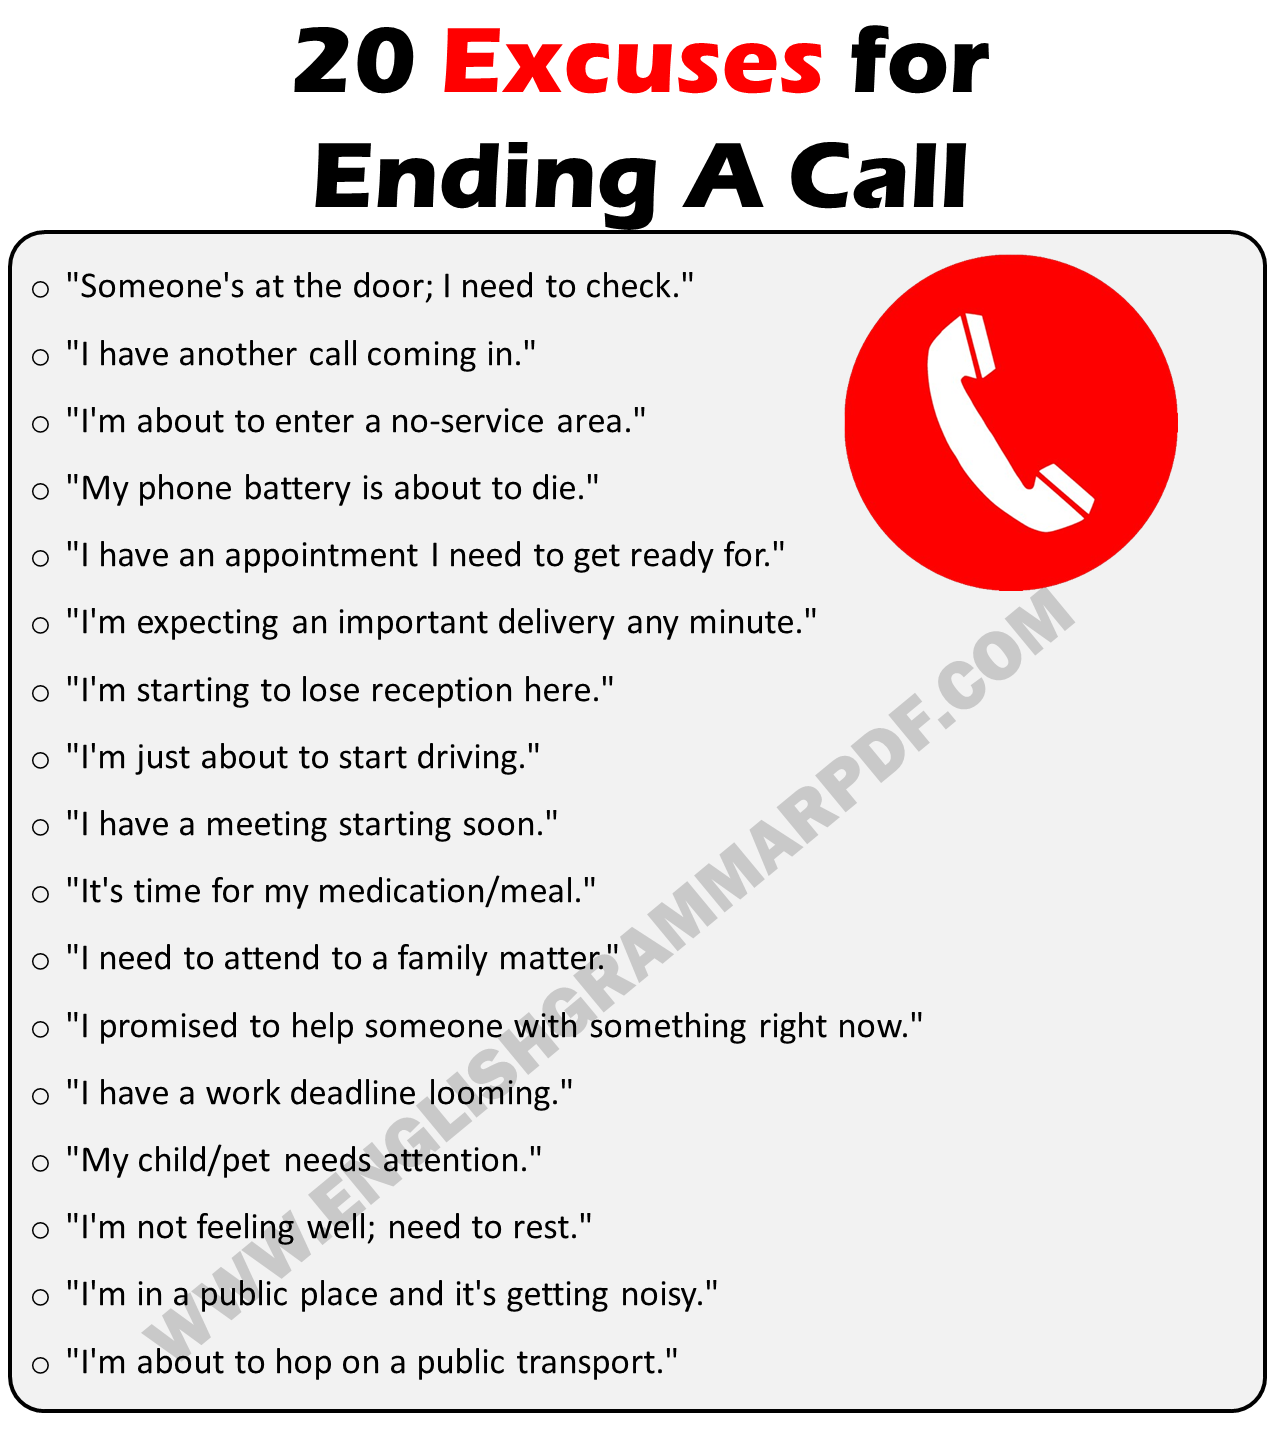 Excuses For Ending A Call